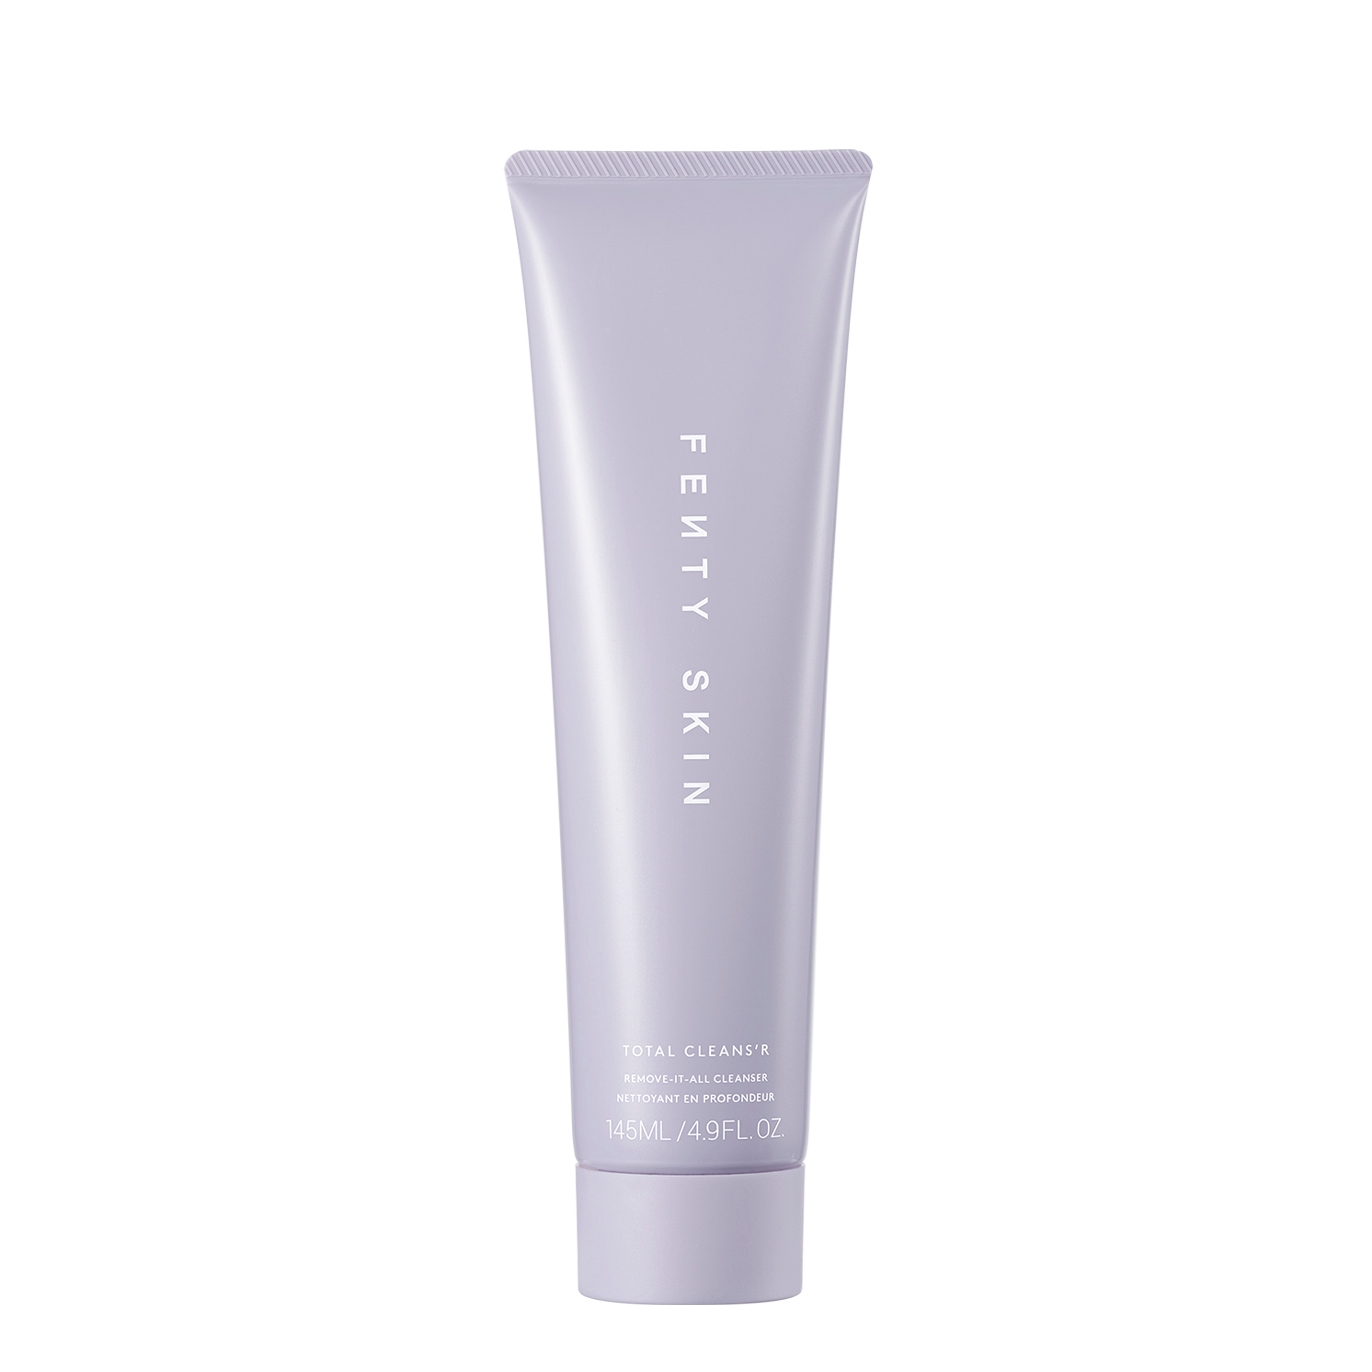 Fenty Skin Total Cleans'r Remove-It-All Cleanser, Cleanser, Oil-Free